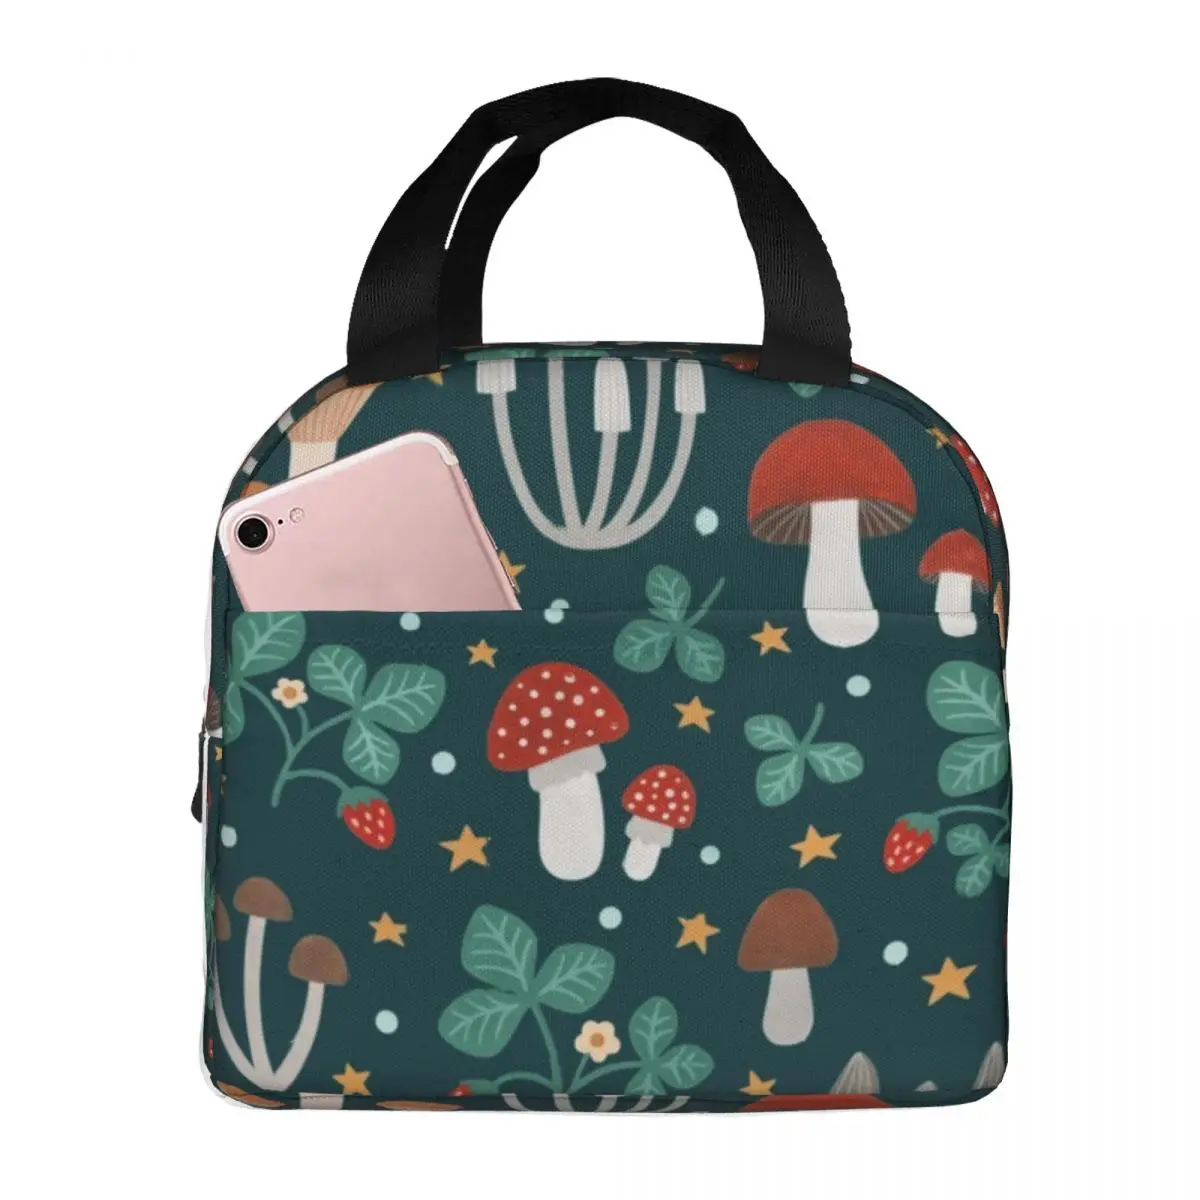 Lunch Bag for Women Kids Magic Forest Psychedelic Mushroom Insulated Cooler Bags Waterproof Picnic Canvas Lunch Box Handbags